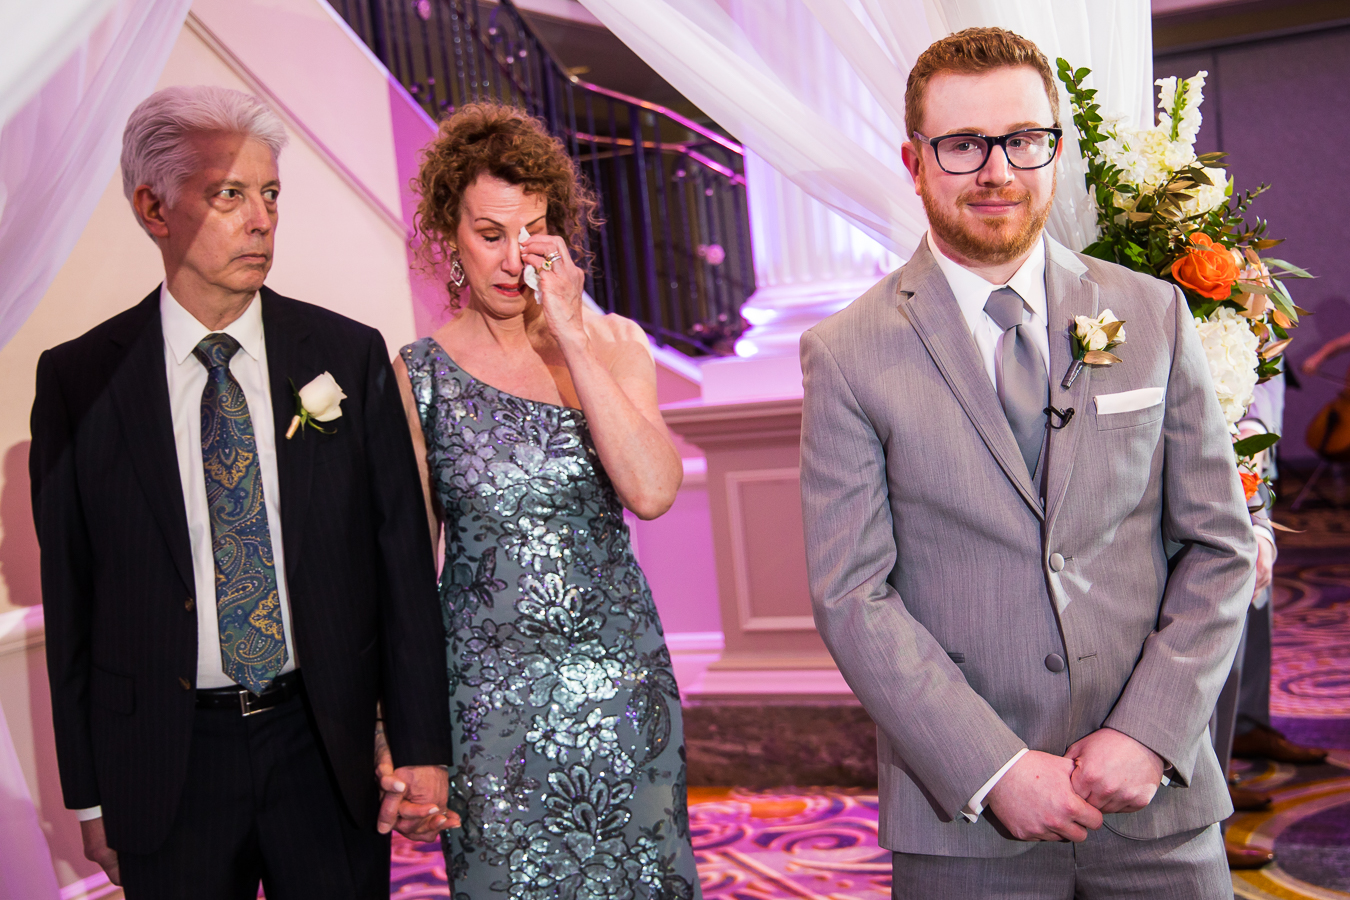 palace at somerset park photographer, lisa rhinehart, captures this authentic image of the groom looking at his bride as she walks down the aisle with his parents standing behind him wiping away tears during this palace at somerset wedding ceremony 